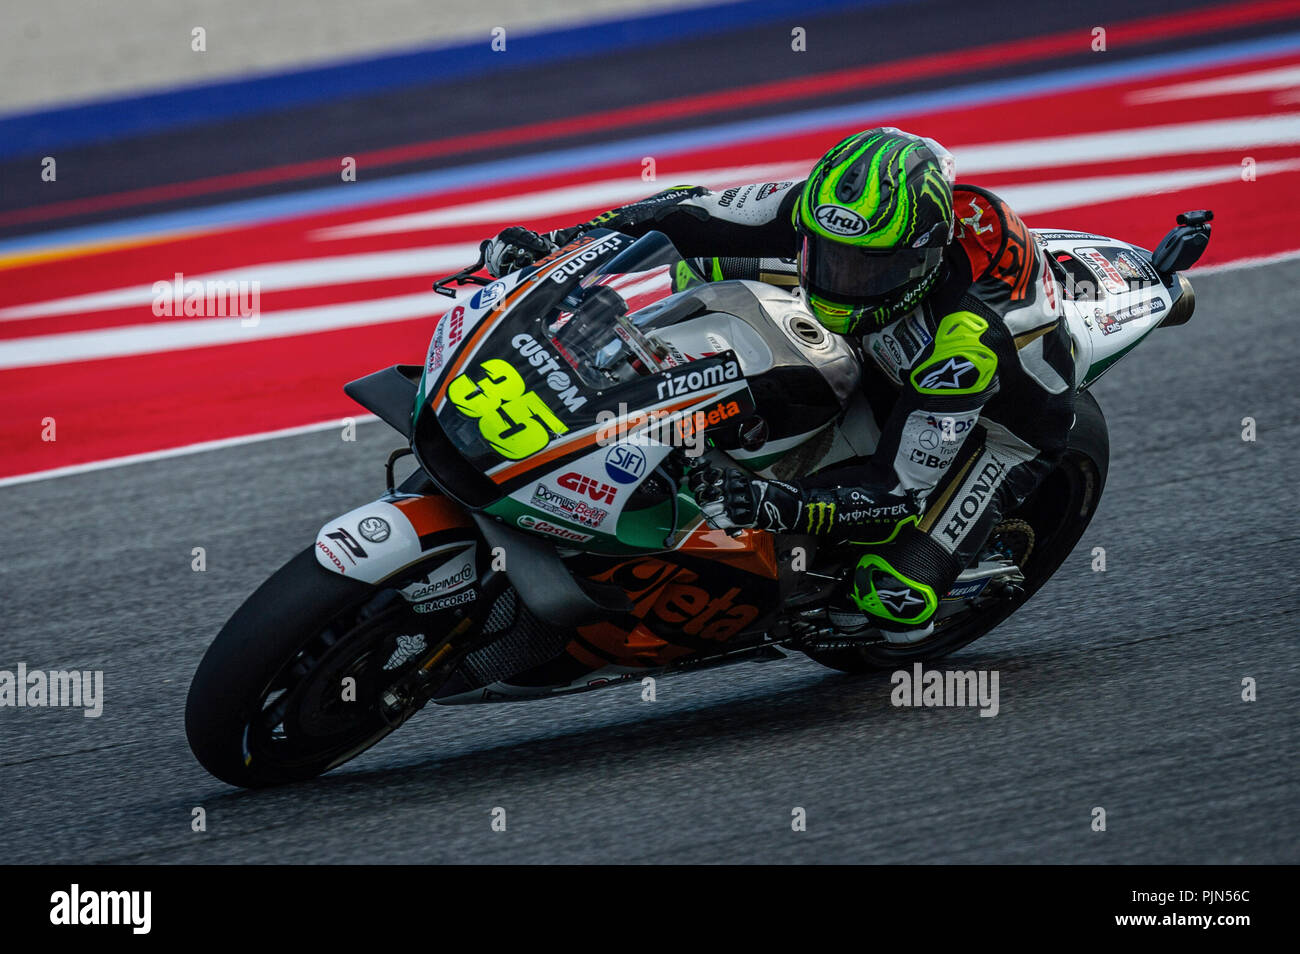 Misano Adriatico, Italy. 07th Sep, 2018. Cal Crutchlow during FP1 in Misano Credit: Lorenzo Di Cola/Pacific Press/Alamy Live News Stock Photo